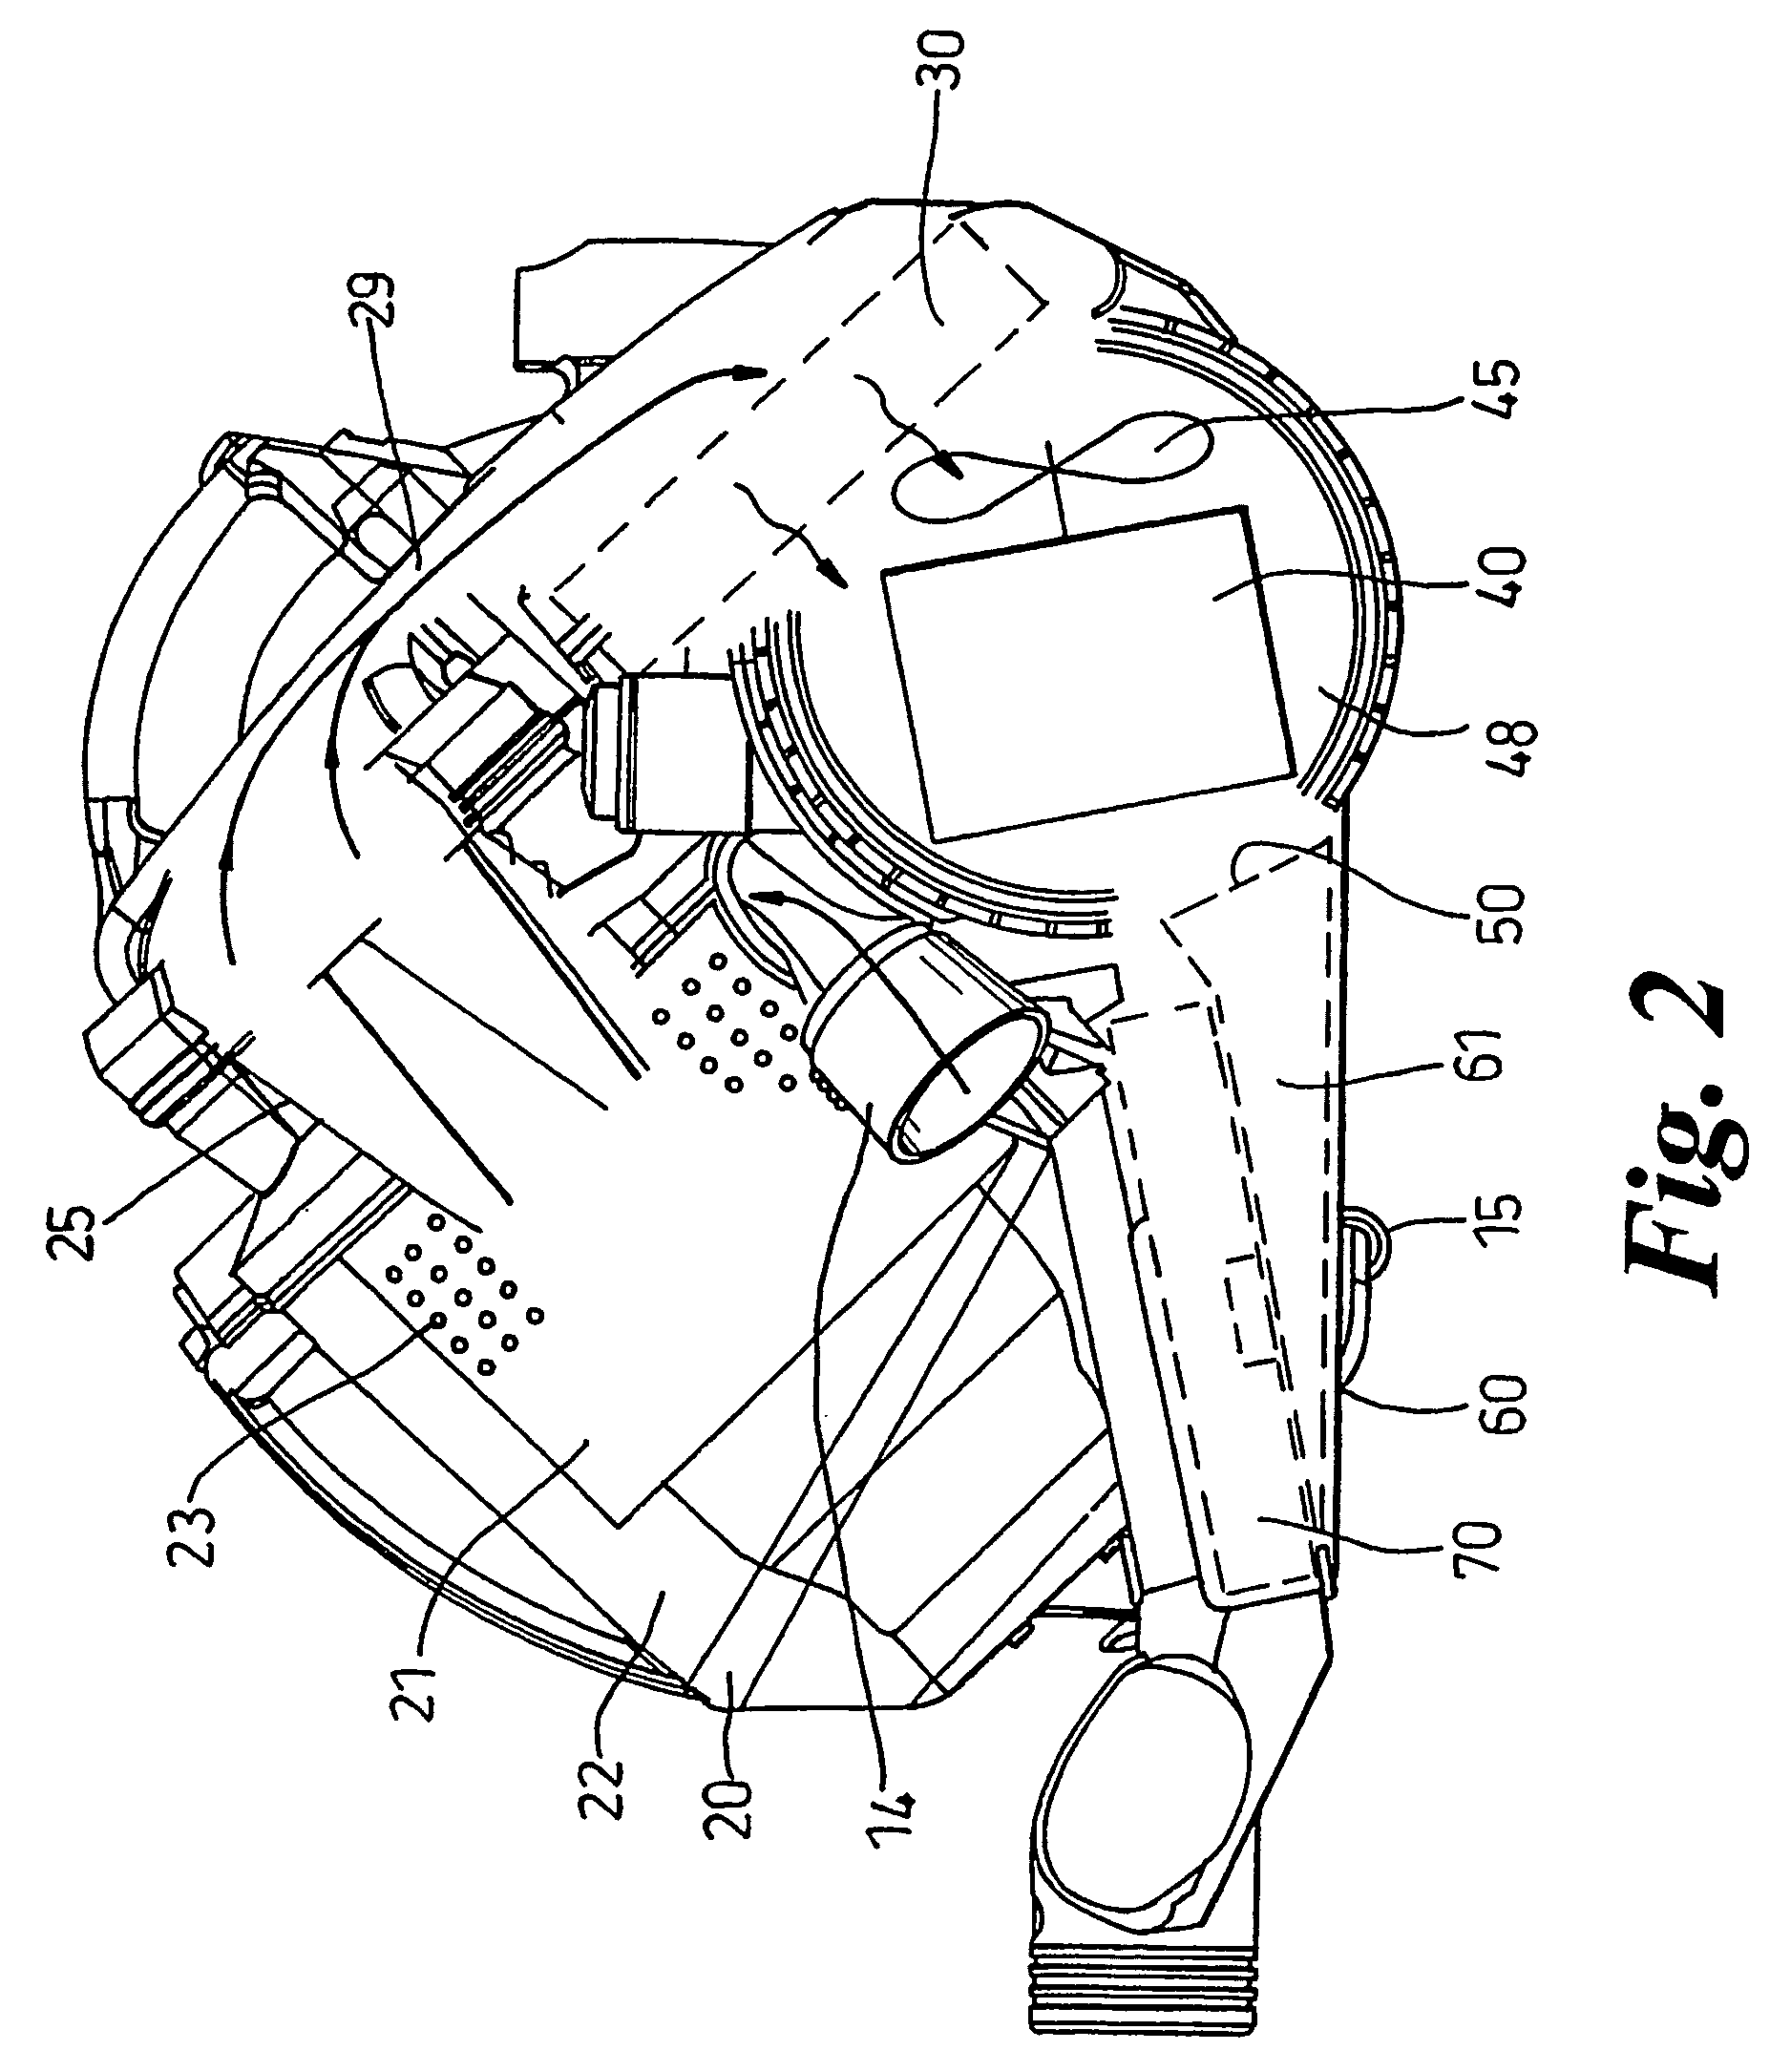 Exhaust assembly